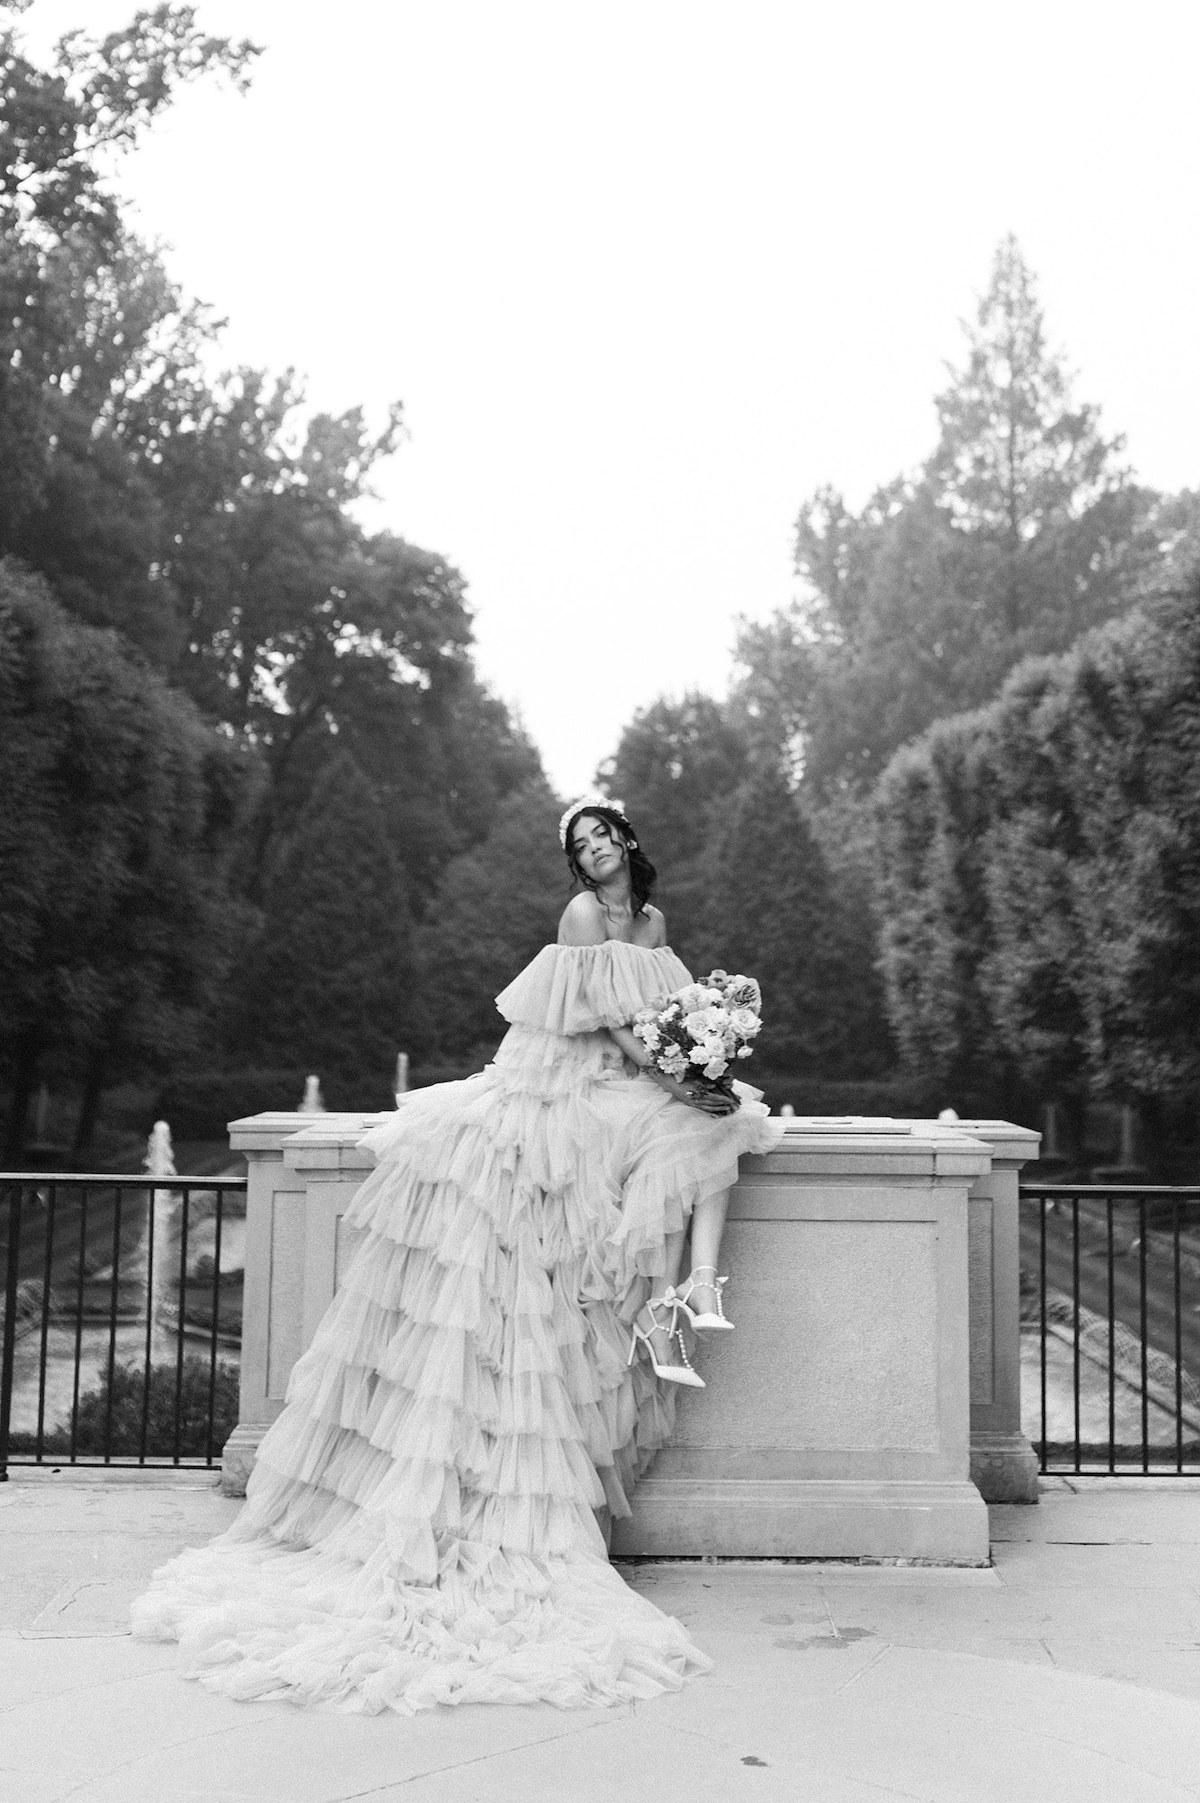 In this timeless black and white image, Karla's allure shines through as she wears the tiered couture gown, adding a touch of classic charm to the garden surroundings.